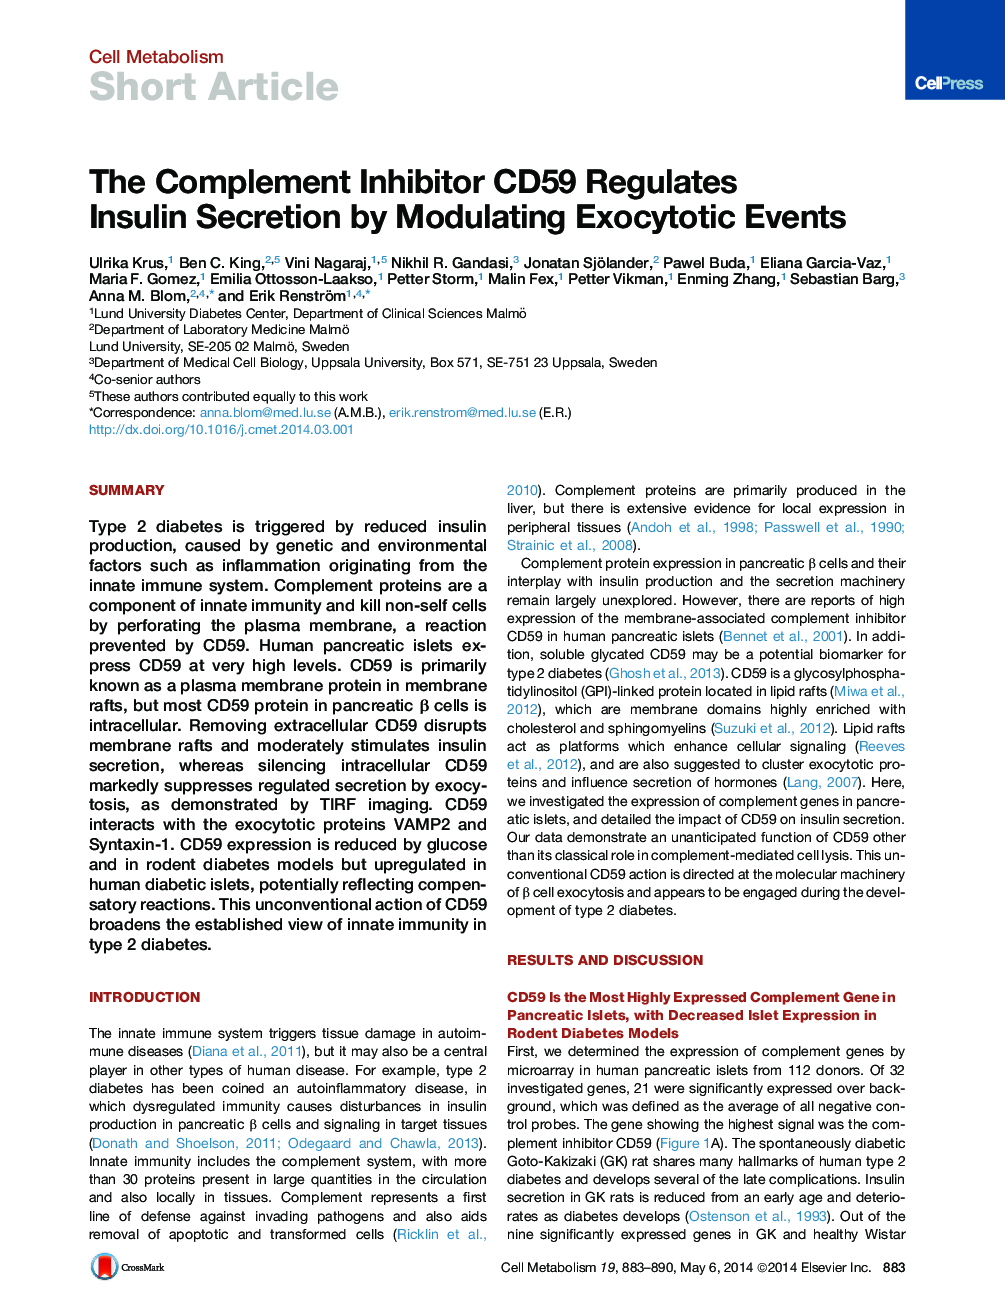 The Complement Inhibitor CD59 Regulates Insulin Secretion by Modulating Exocytotic Events